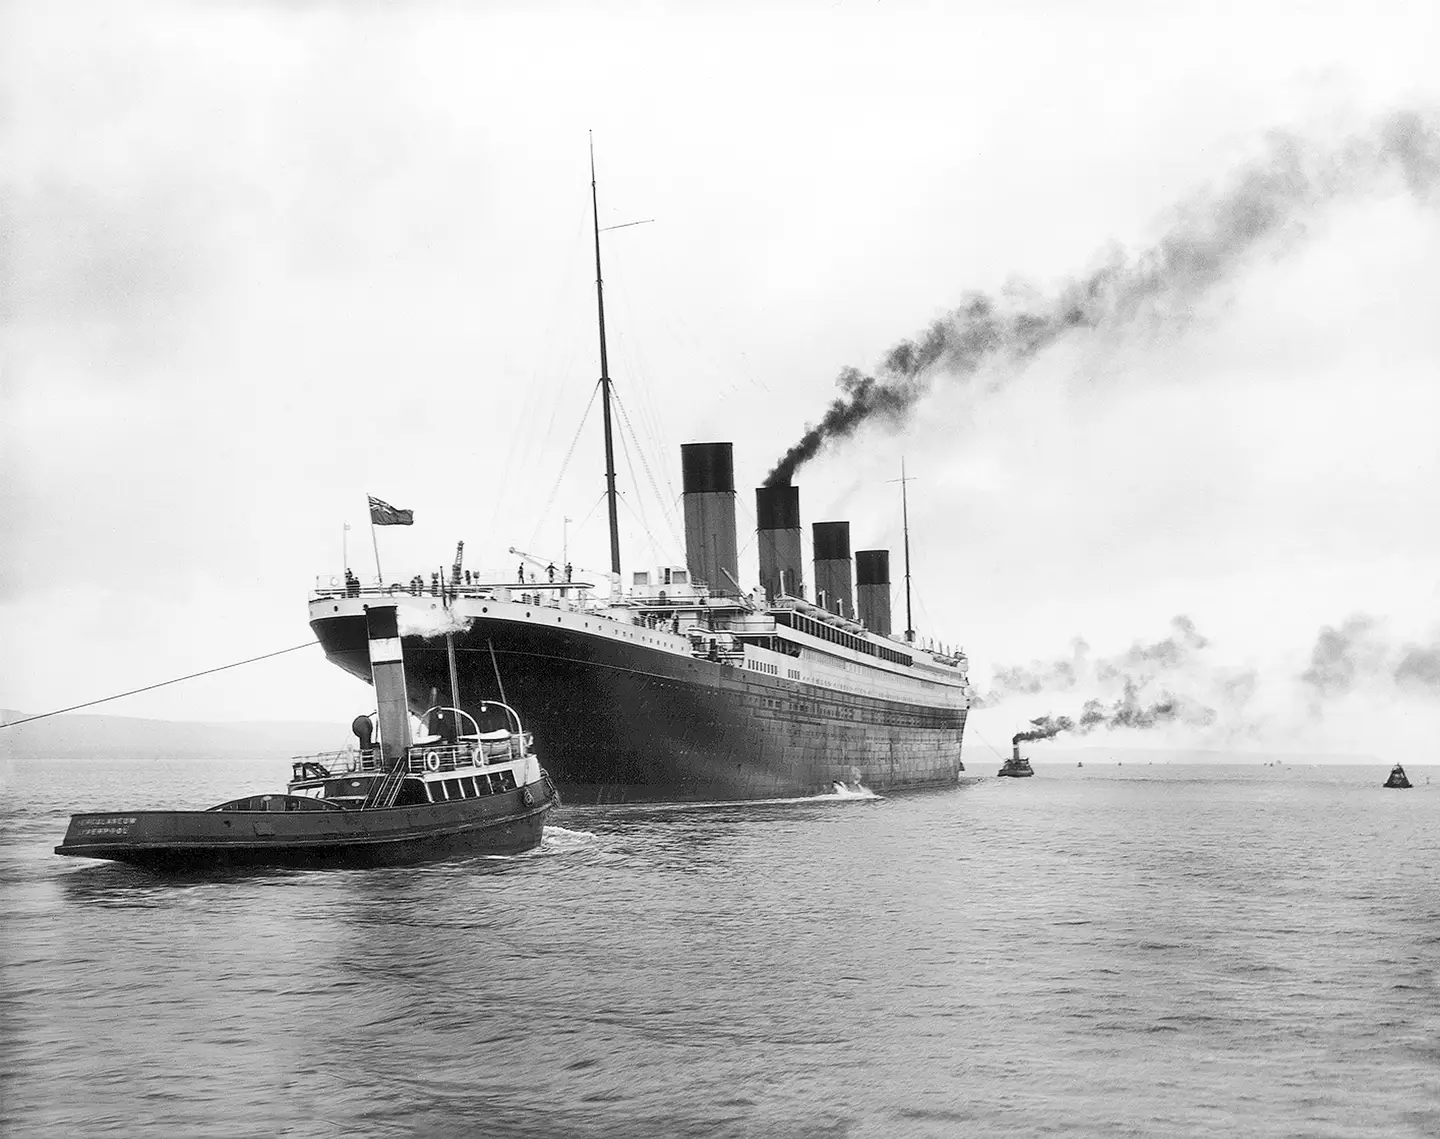 It was supposed to be 'unsinkable'. (Pictures from History/Universal Images Group via Getty Images)